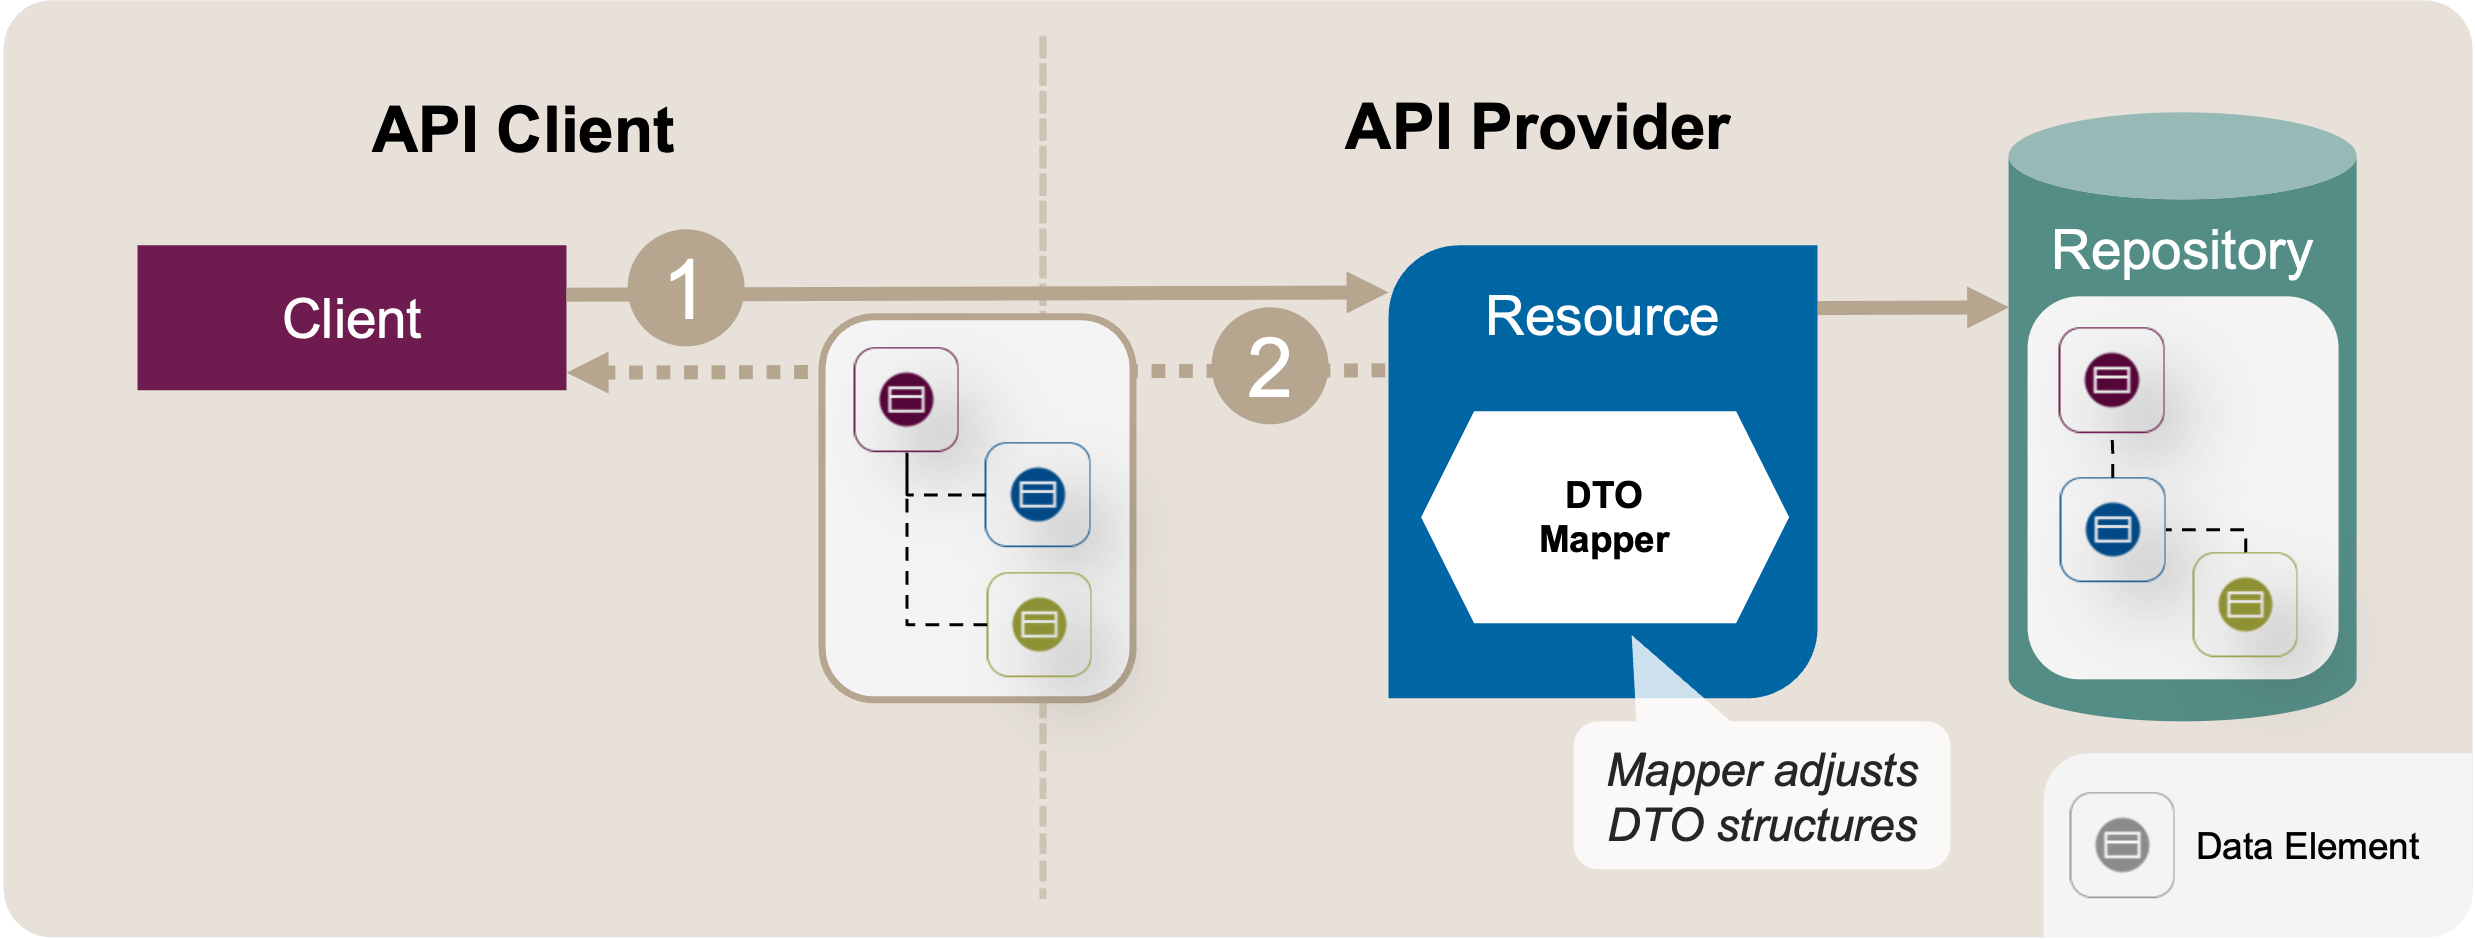 Introduce Data Transfer Object: Target Solution Sketch. Instead of passing through the data for the client's request (1), an additional DTO mapper transforms the data elements before they are returned (2). The implementation types can be changed without affecting the API.